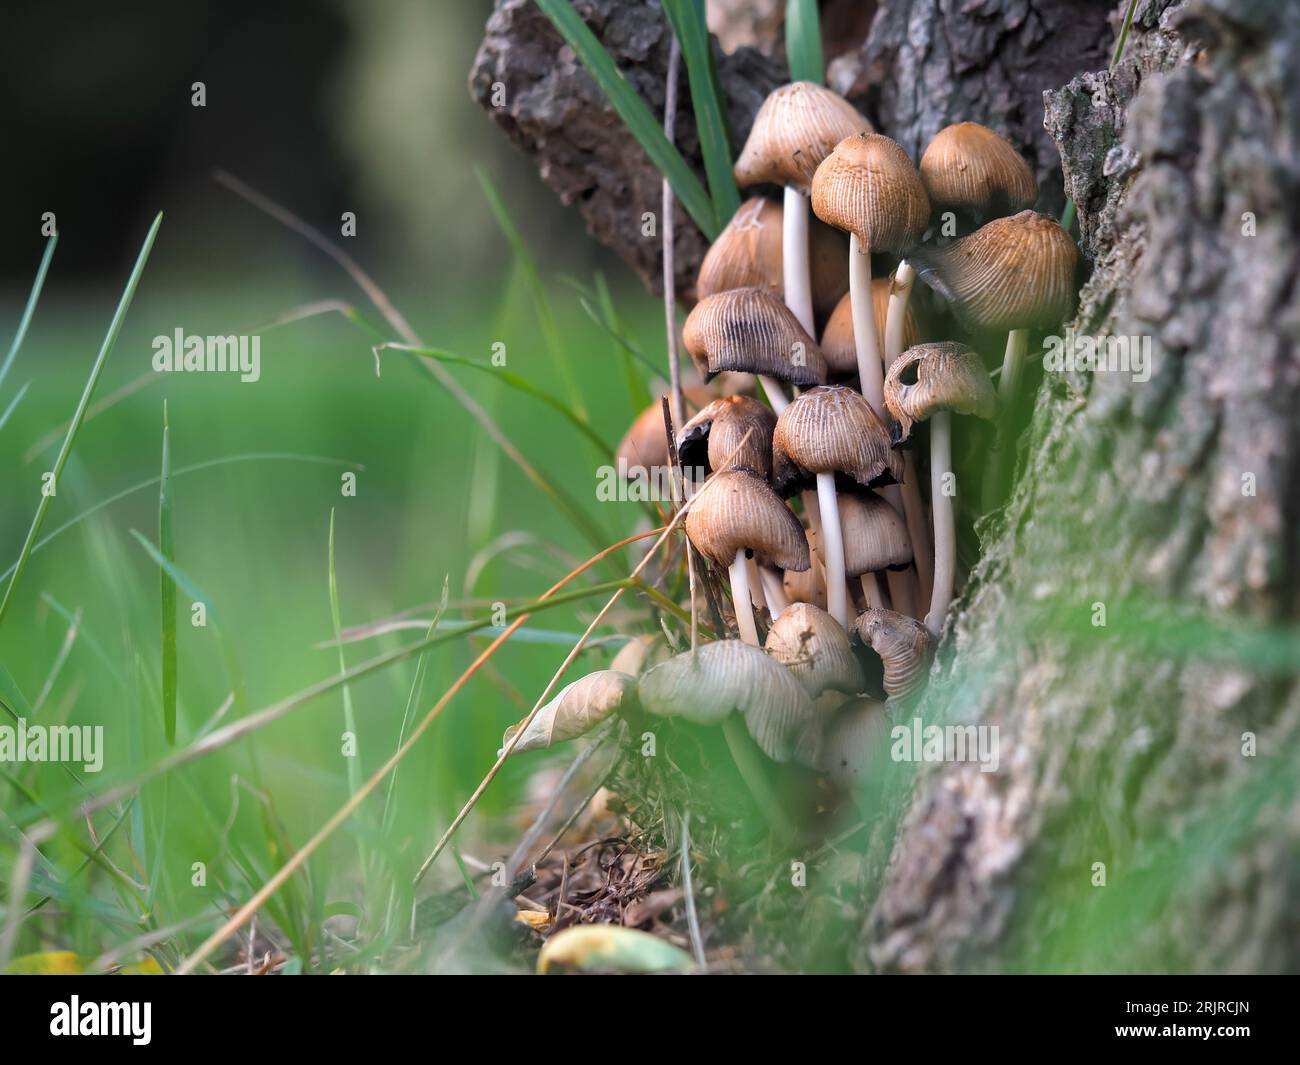 Shiny blackberry, Coprinellus micaceus mushrooms growing by a tree among grasses on a blurred background at close range, Edible but also poisonous mus Stock Photo